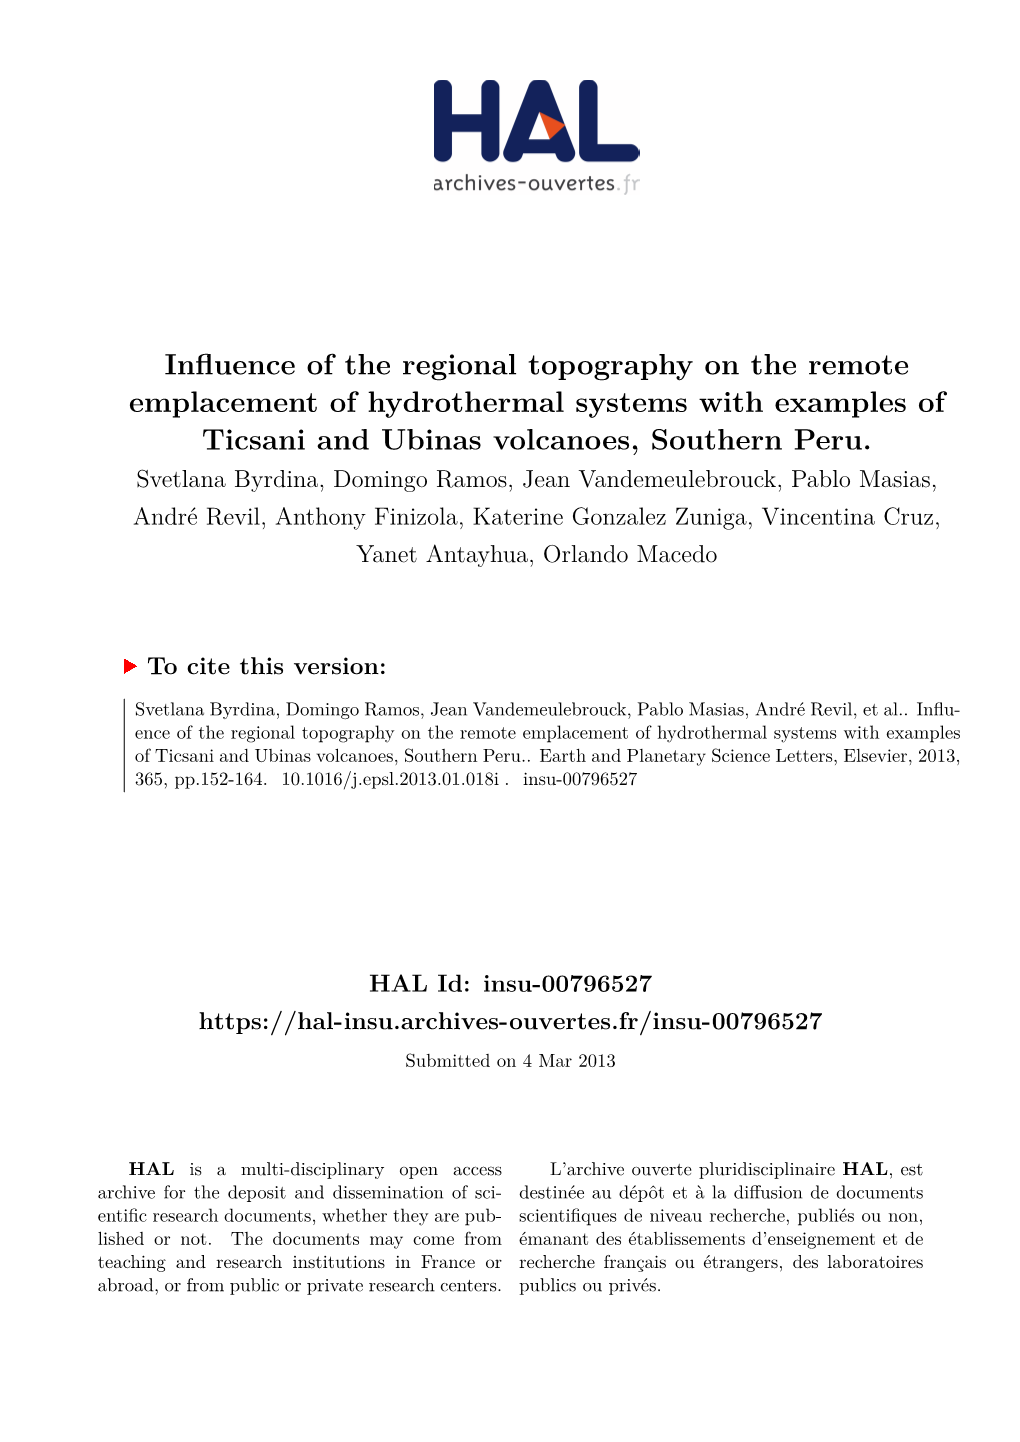 Influence of the Regional Topography on the Remote Emplacement of Hydrothermal Systems with Examples of Ticsani and Ubinas Volcanoes, Southern Peru